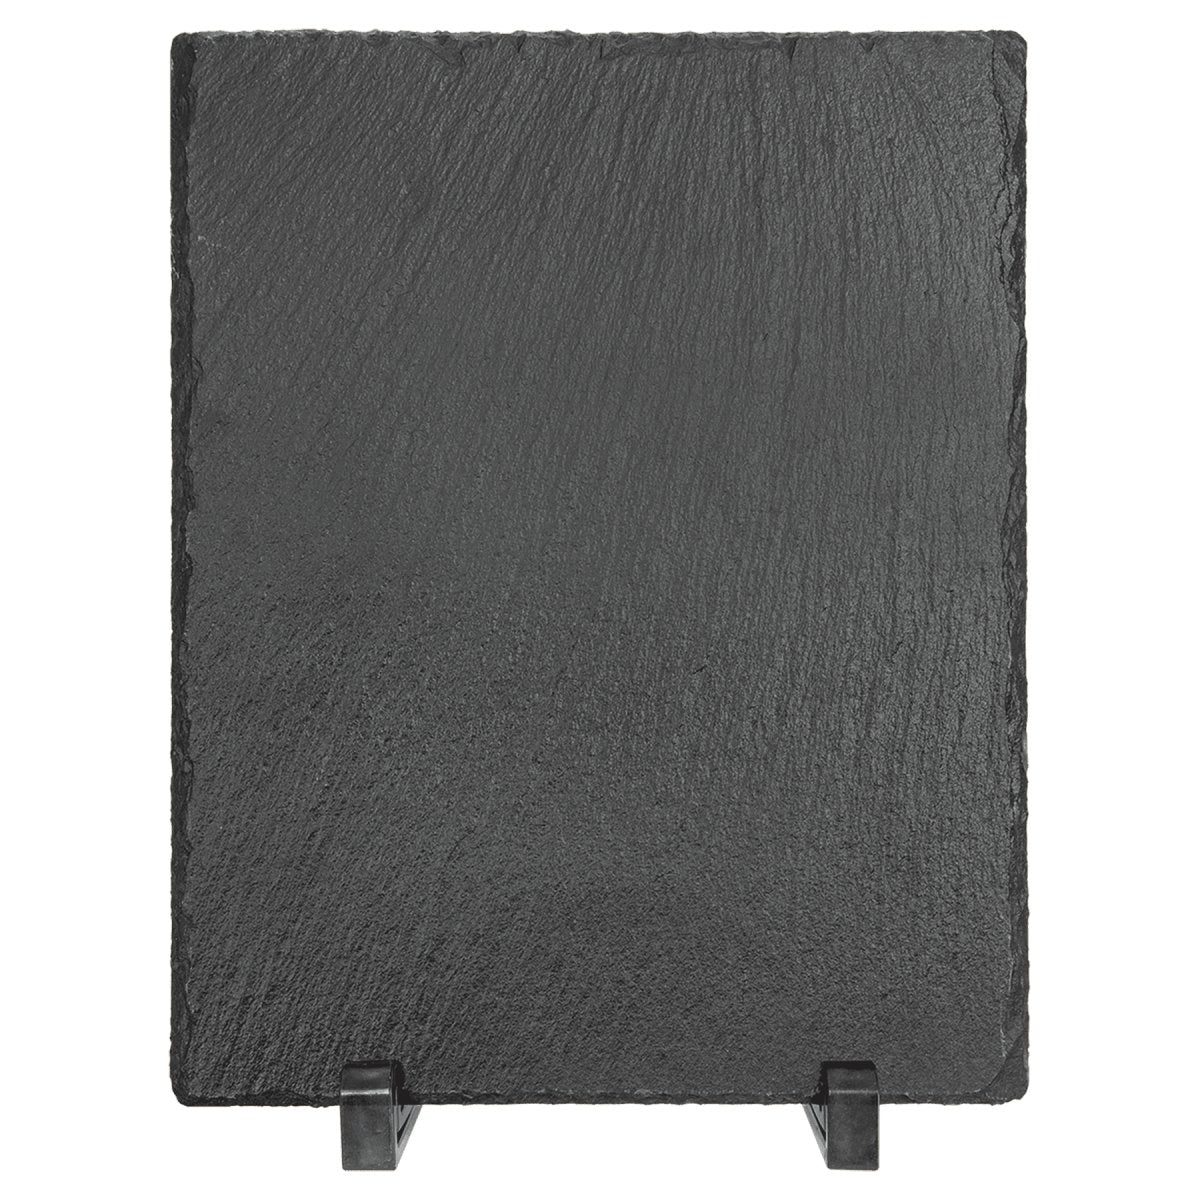 Laserable Slate Decor with Plastic Stands, Rectangle 10" x 8" - Inkfinitee Sublimation